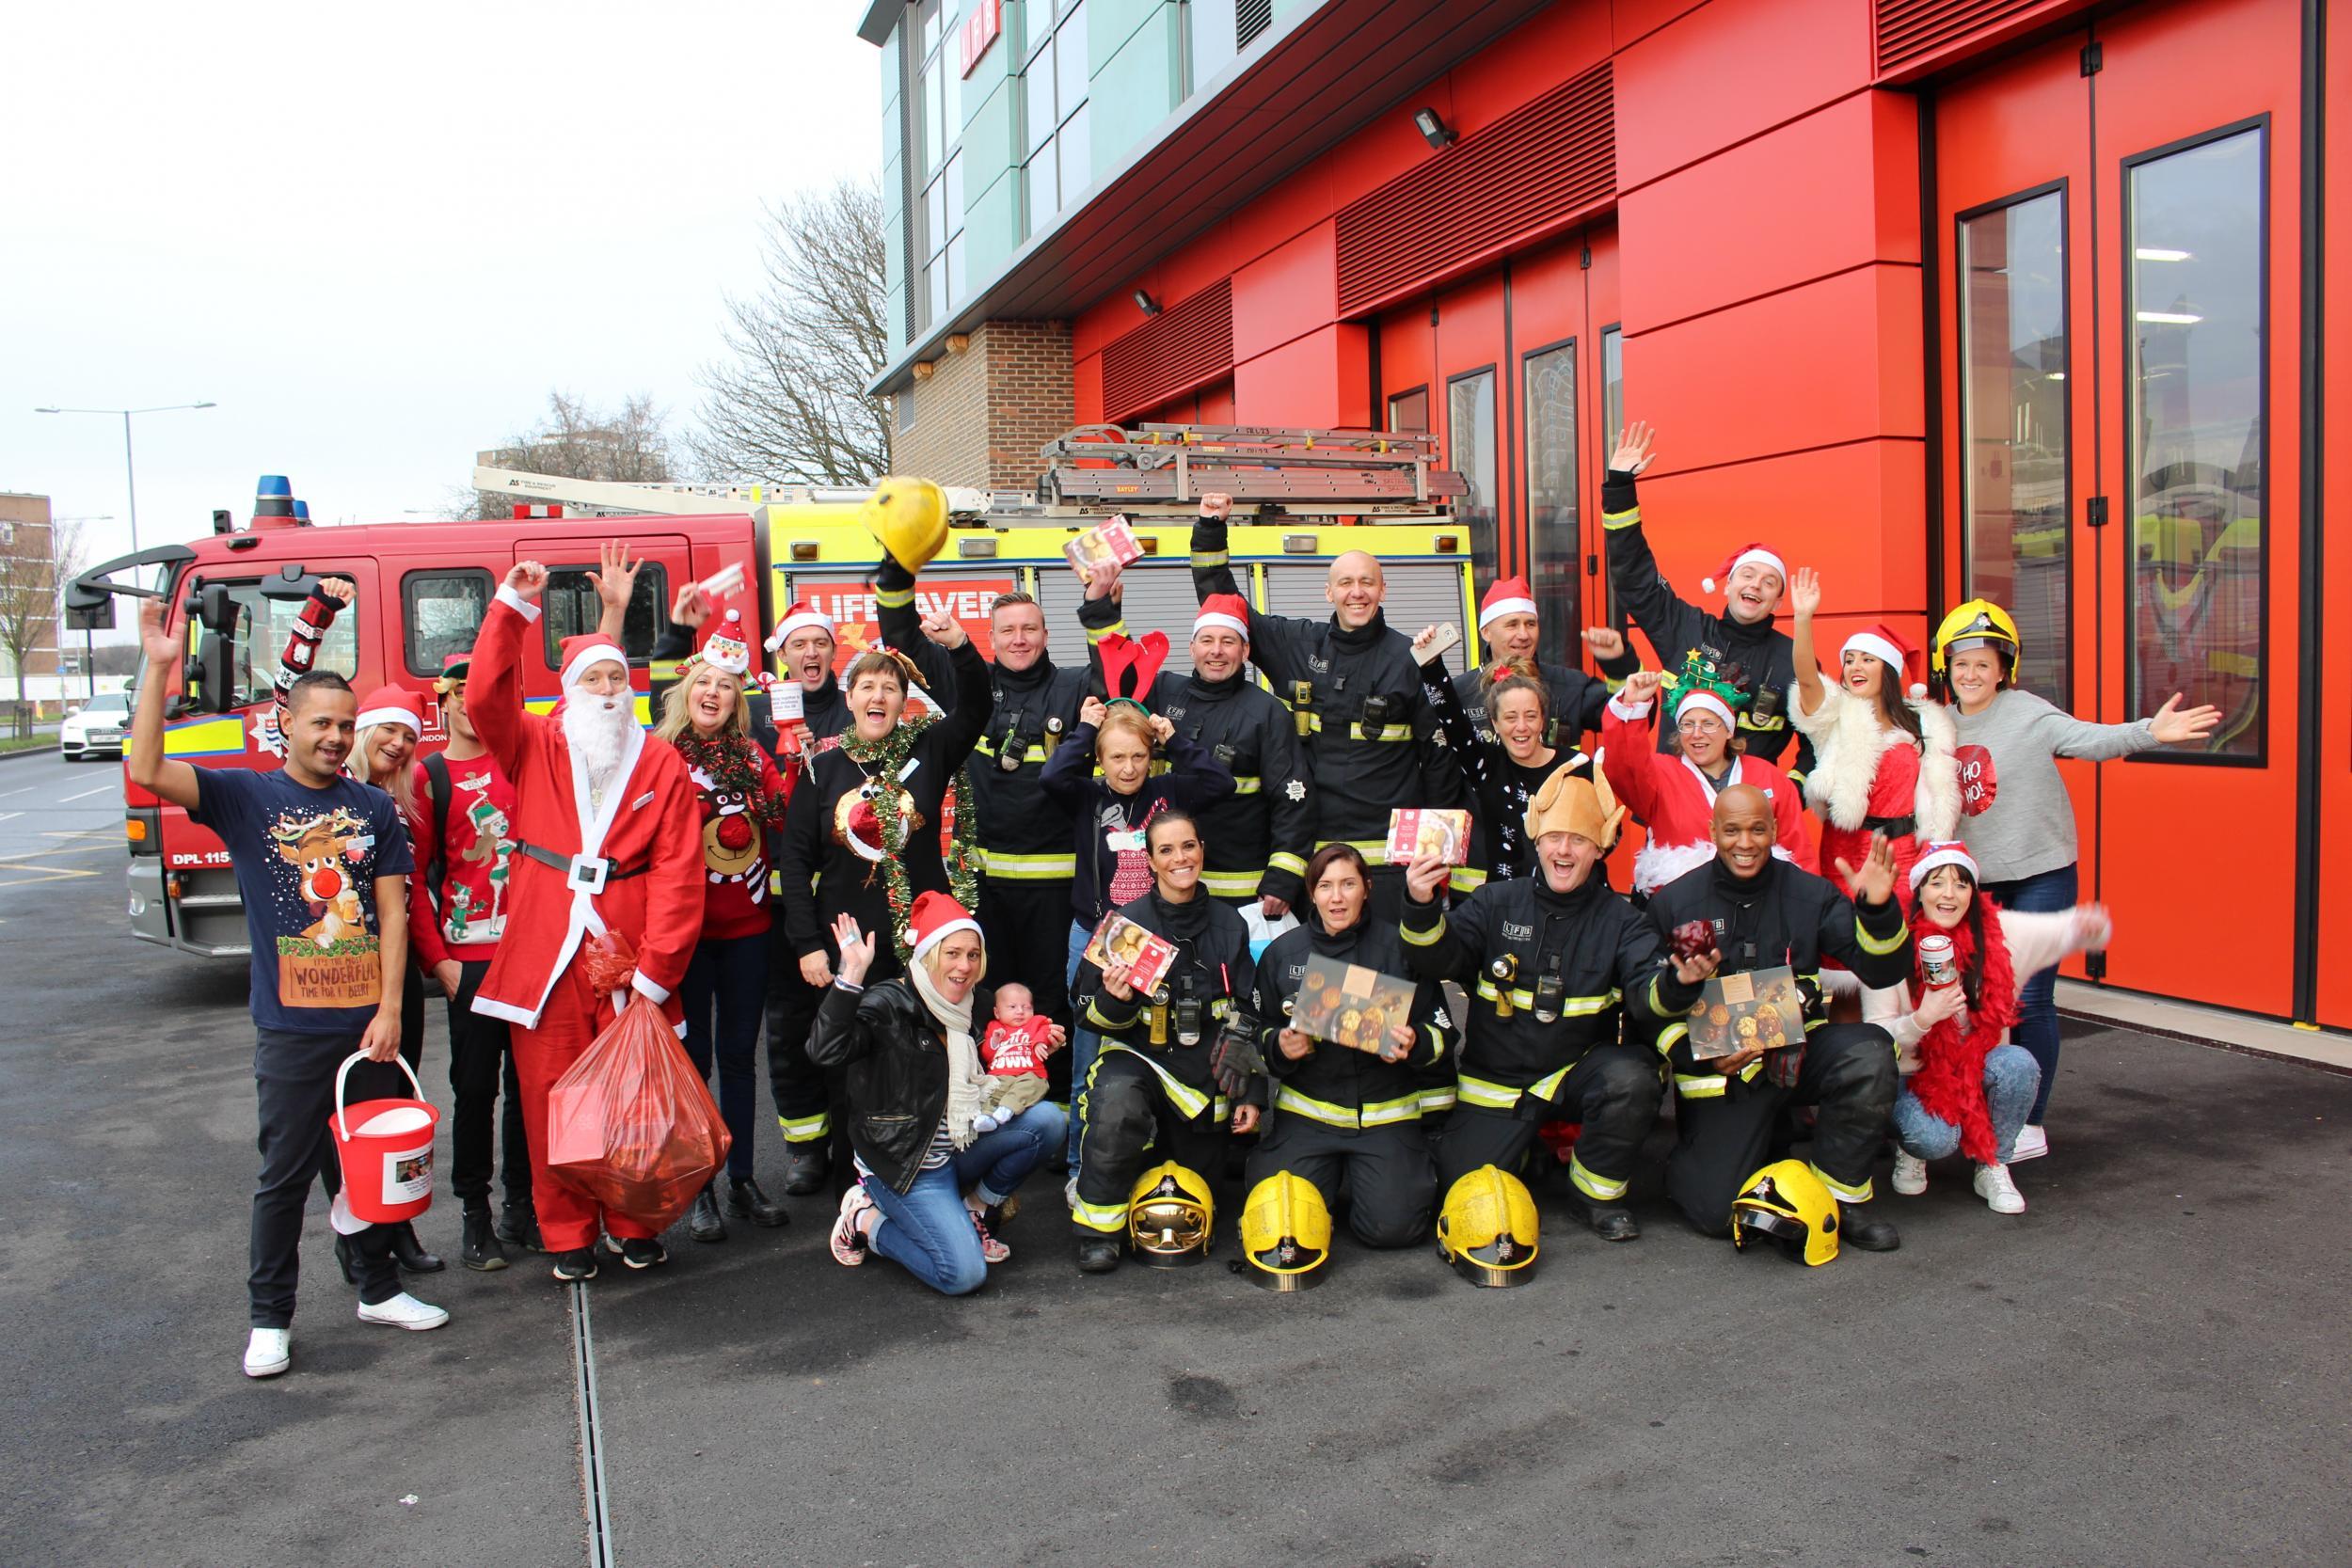 This Christmas, the London Fire Service and Co-op are joining forces to cook Christmas dinner for the local community